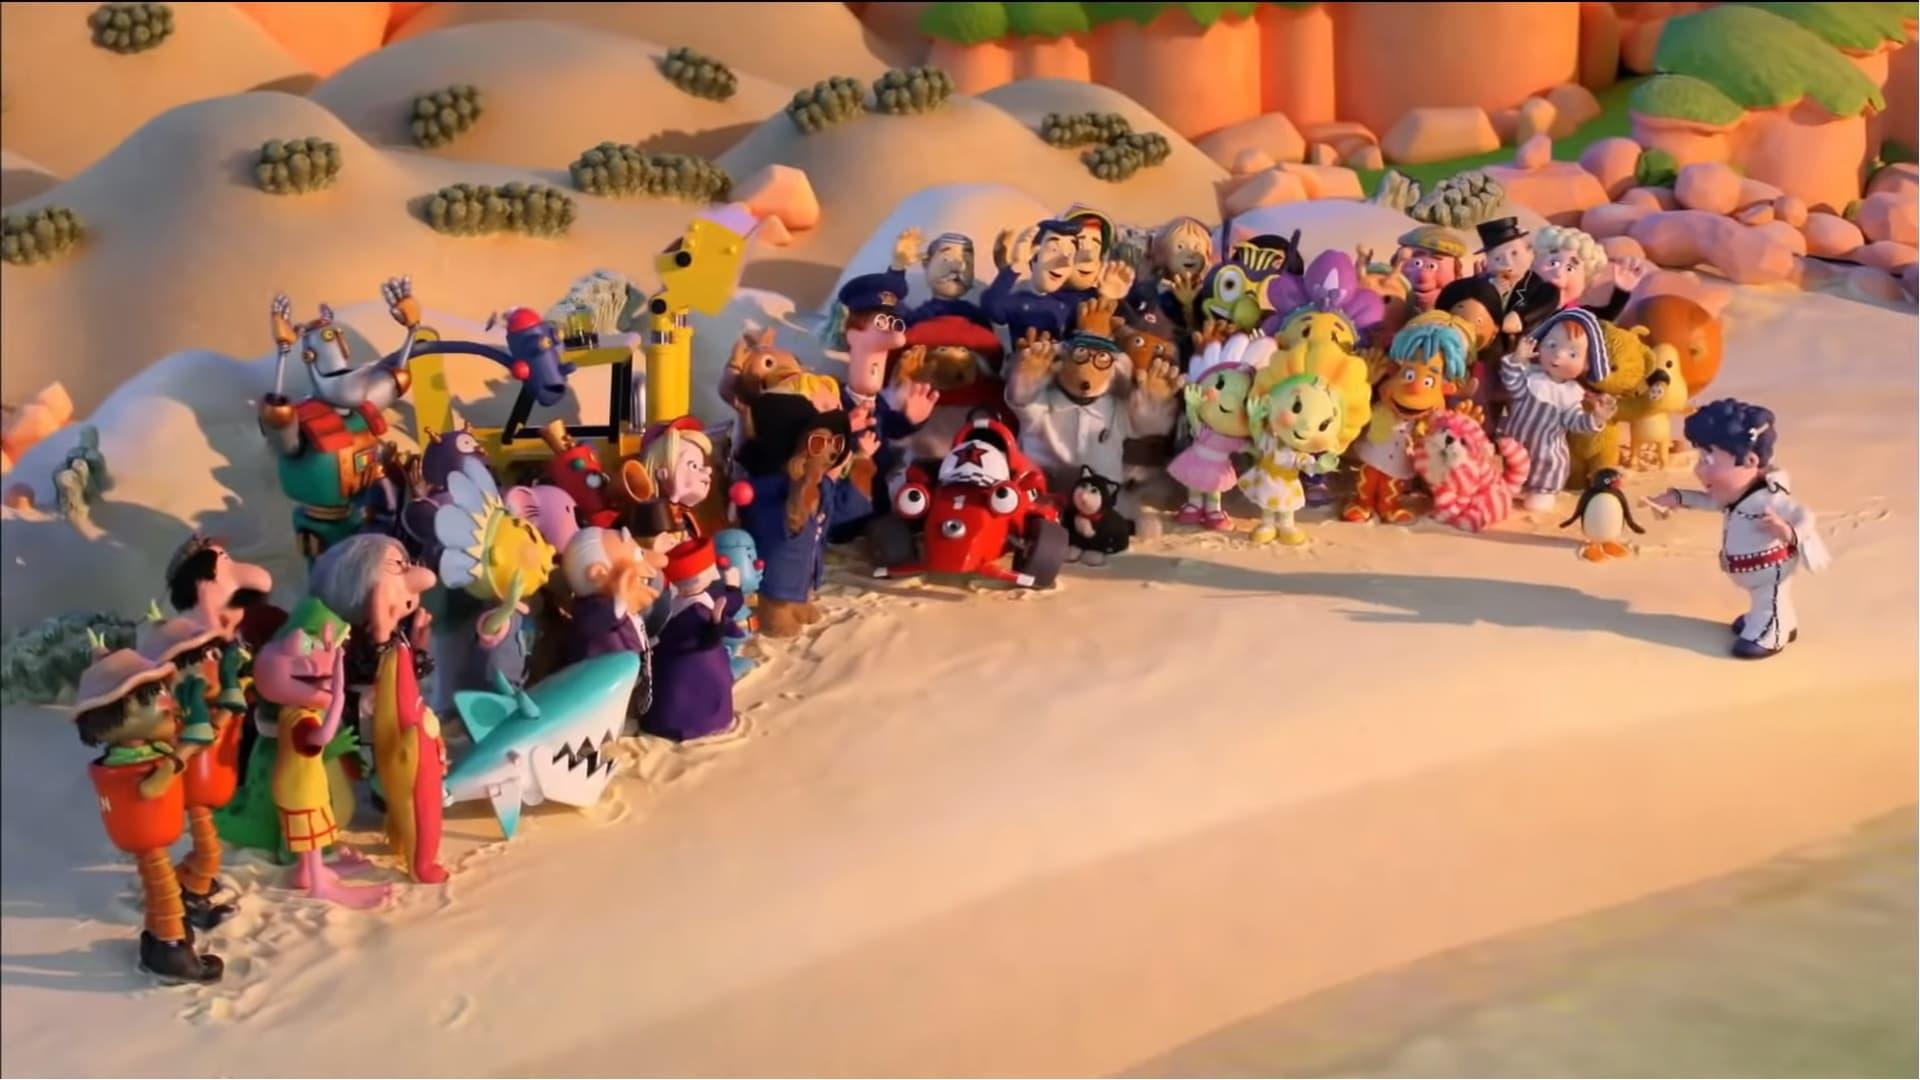 Peter Kay's Animated All Star Band: The Official BBC Children in Need Medley backdrop